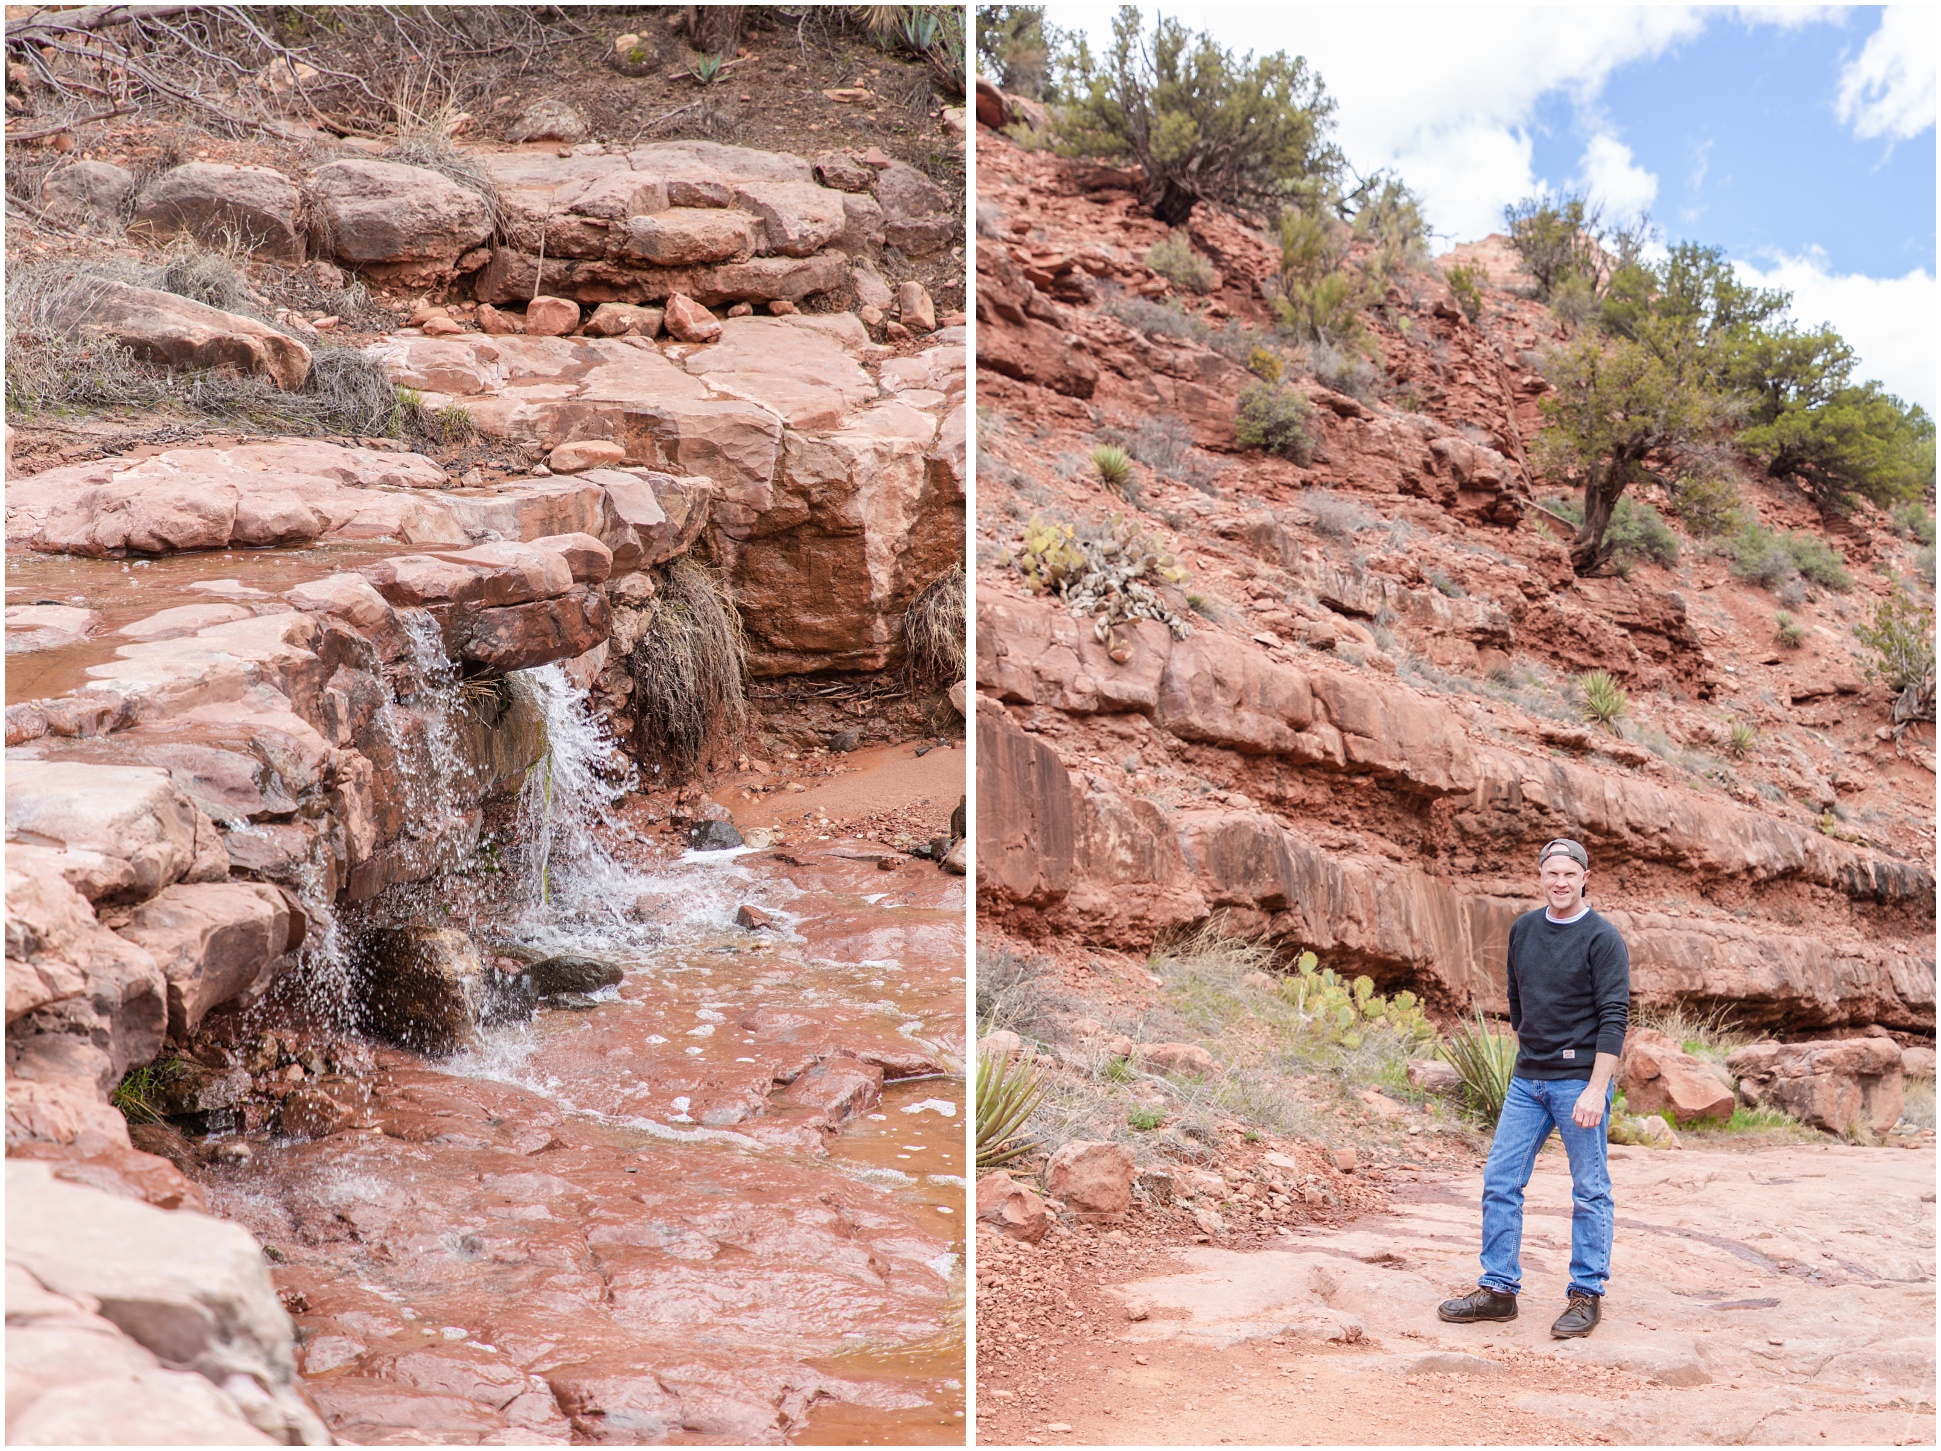 Left: Waterfall on Schnebly Hill Rd. Right: Dad standing on Schnebly Hill Rd